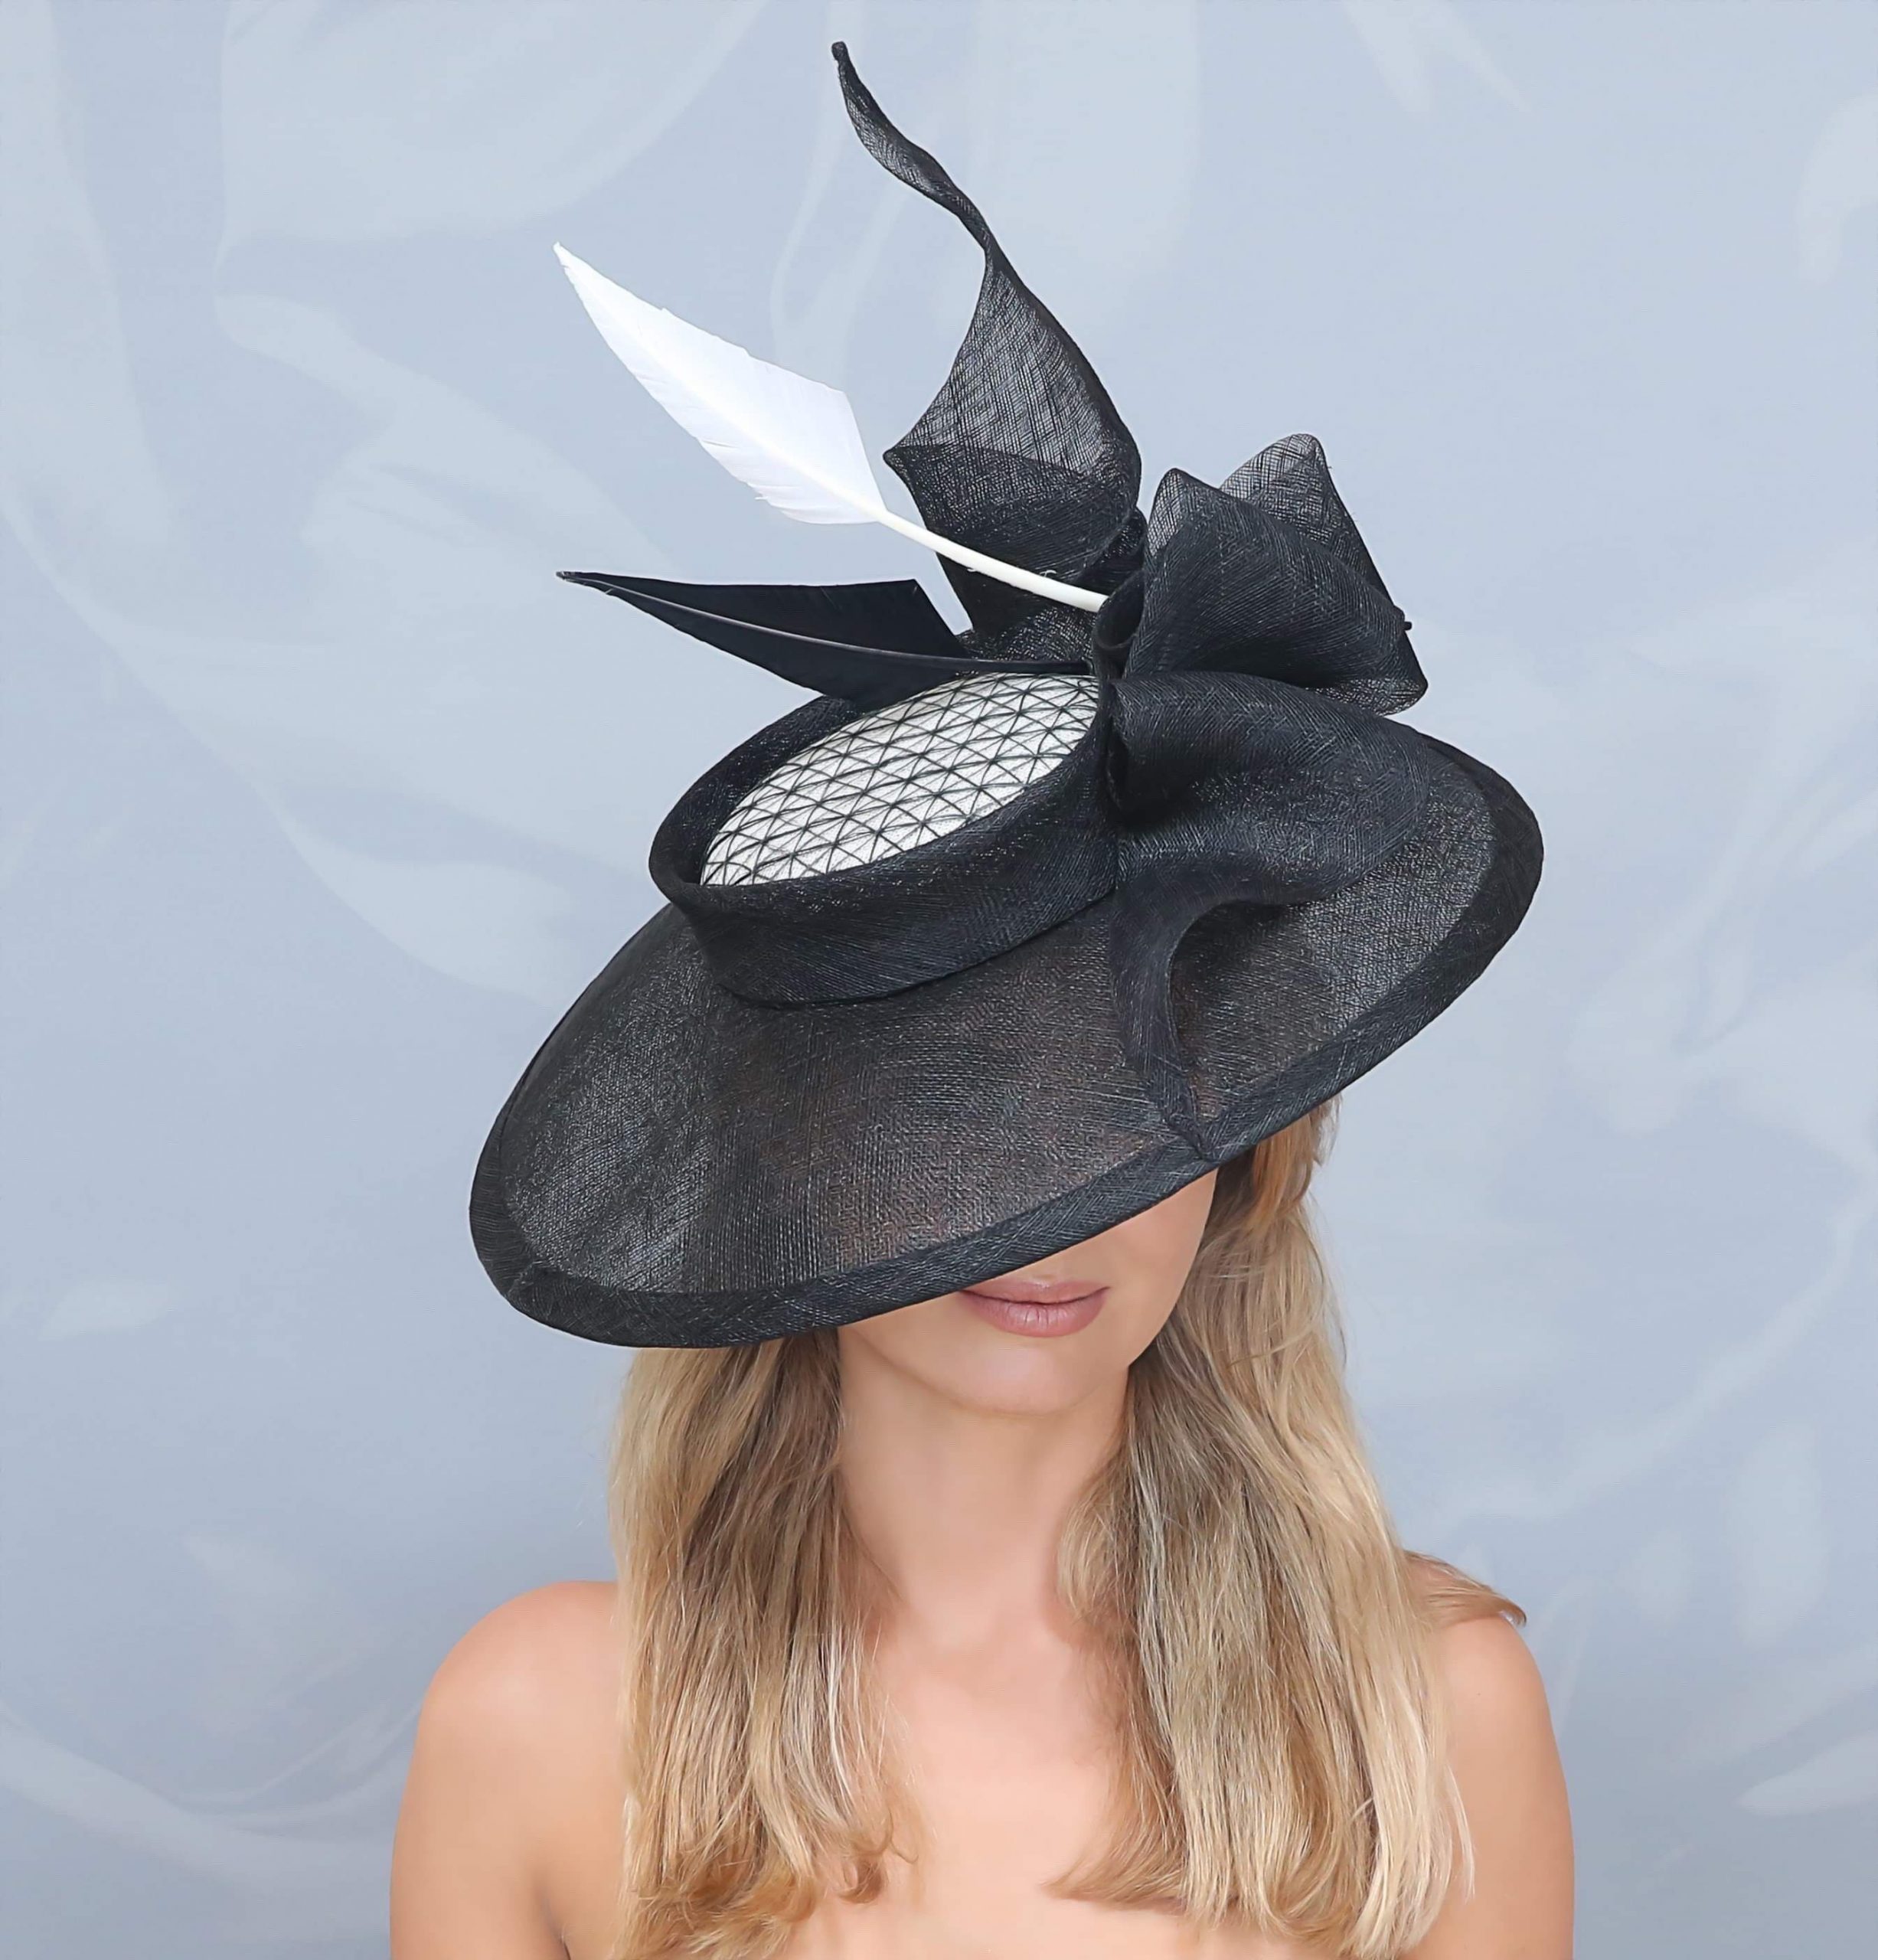 Black and white Kentucky Derby hat. Derby hat. Fascinator. Women’s hat. Designer hat. Fashion hat. Couture hat. Royal ascot. Preakness. Gift